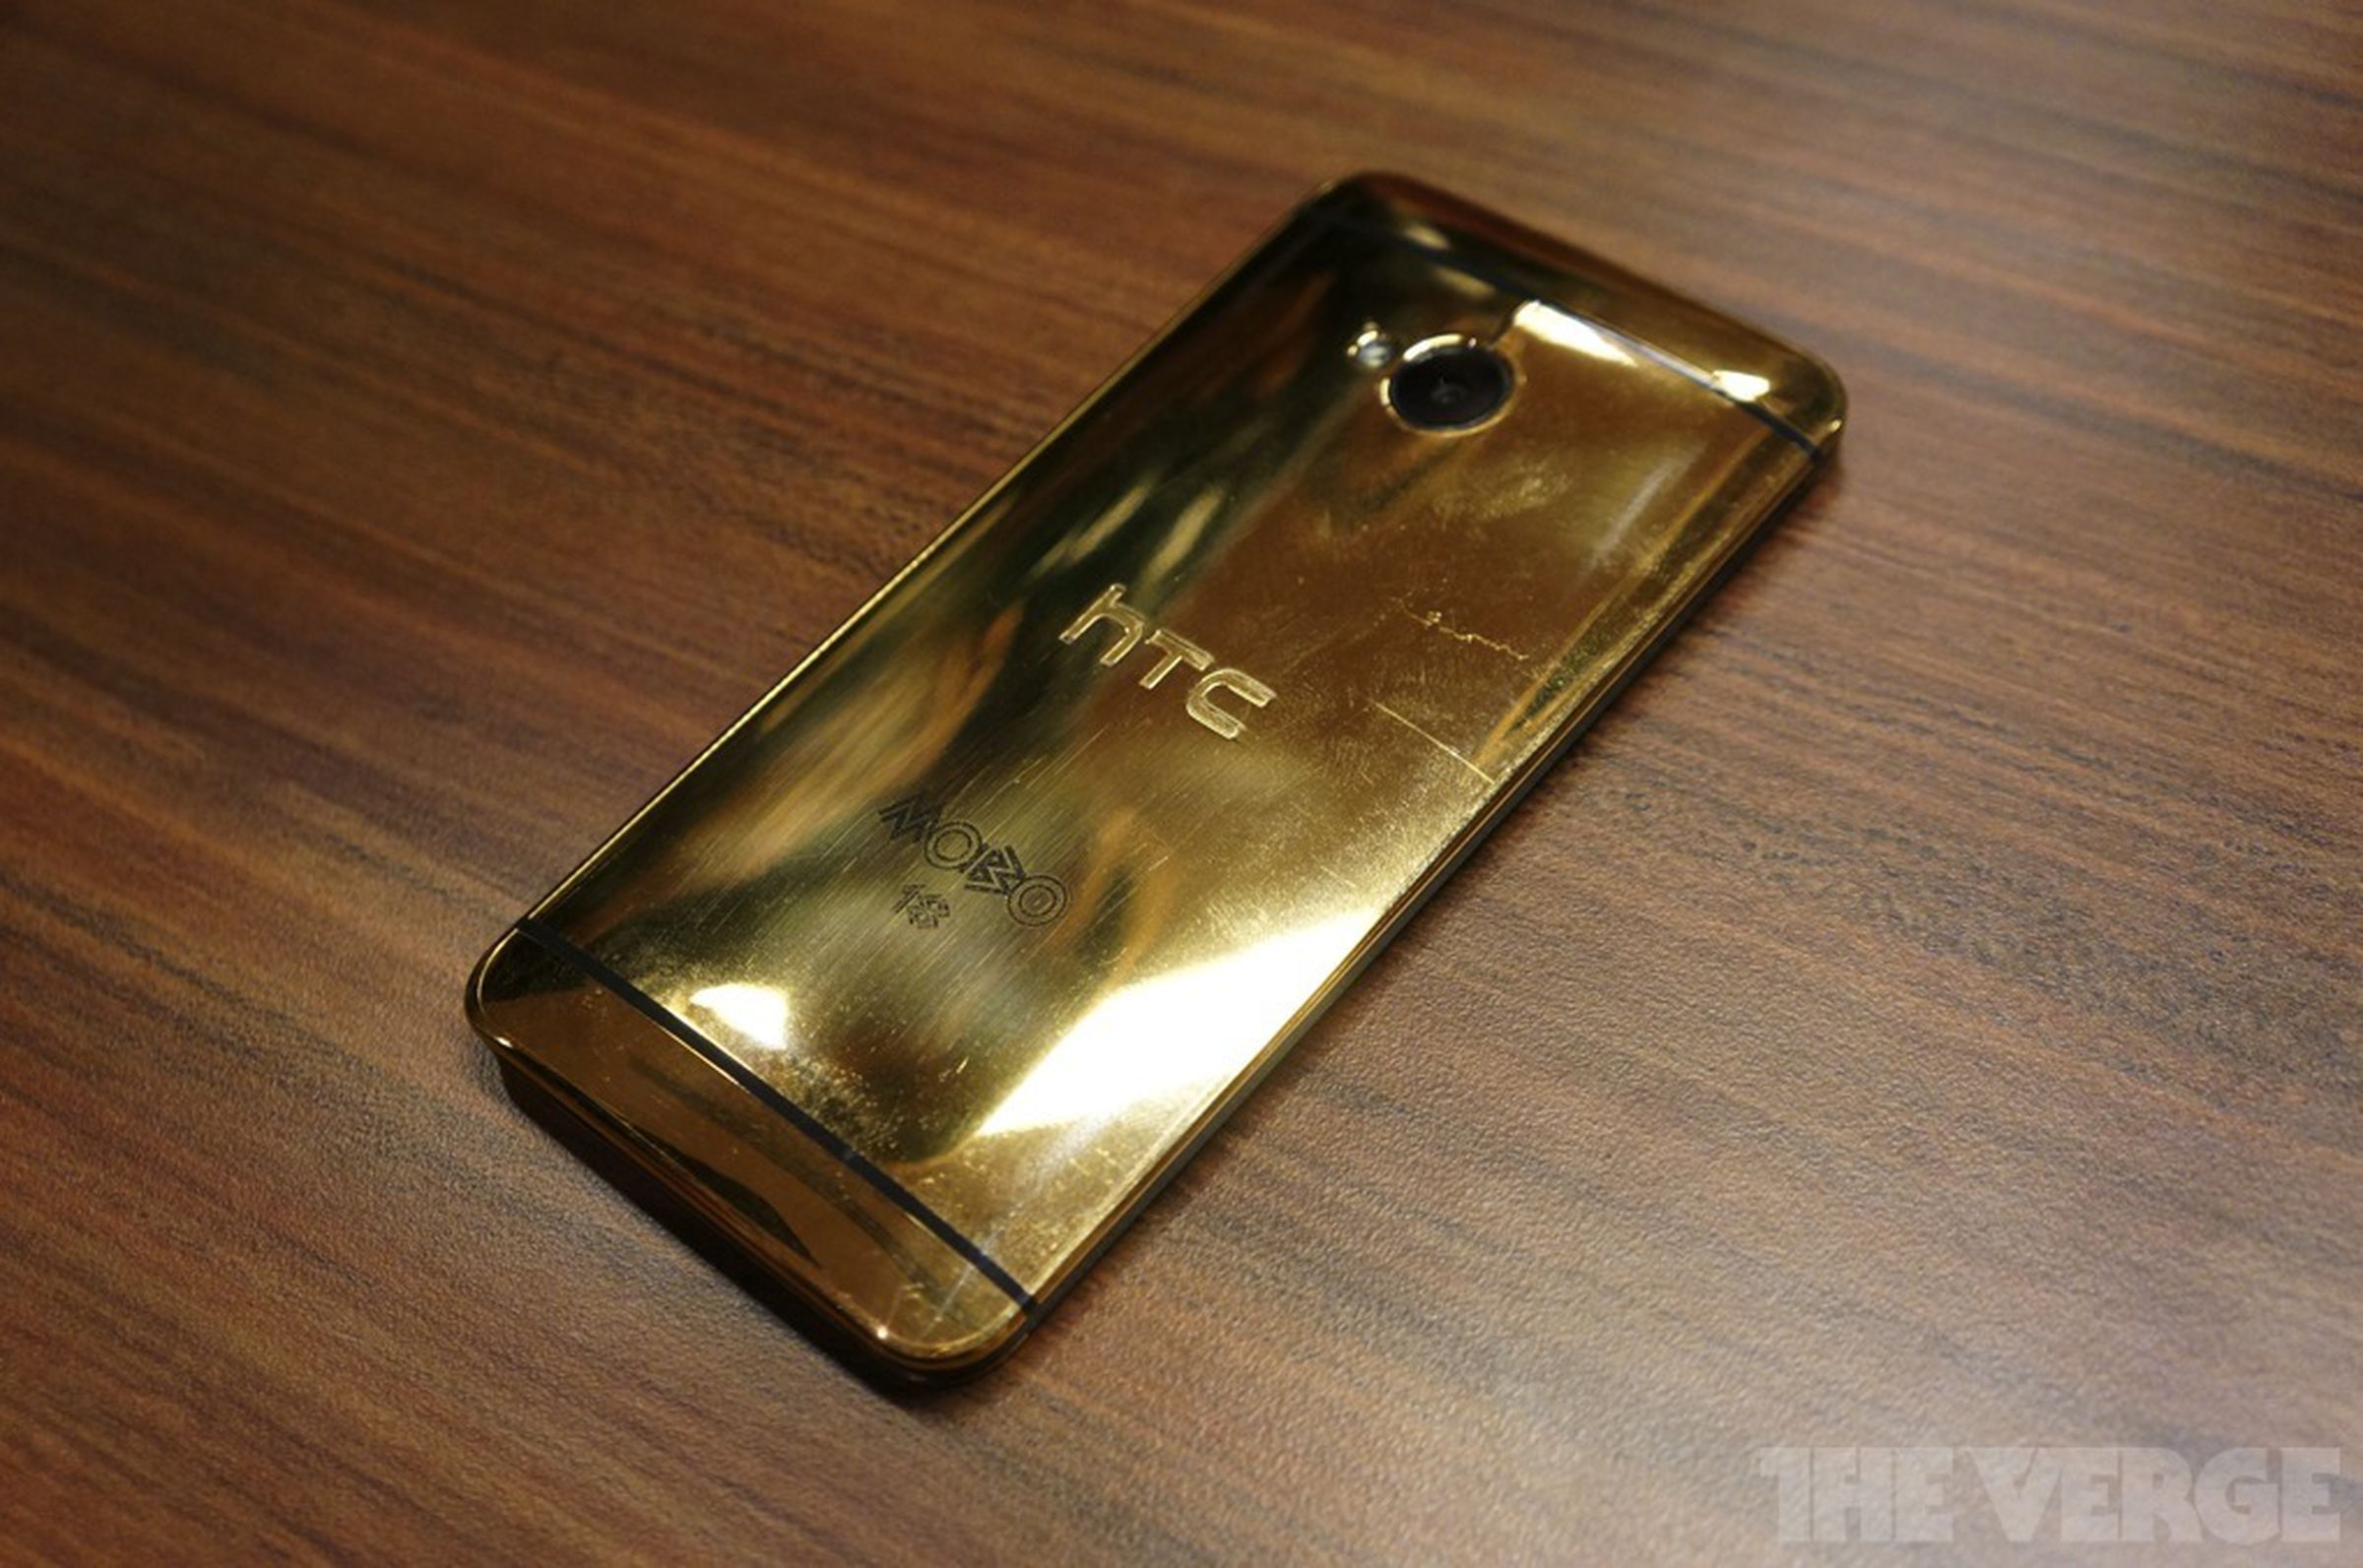 HTC One gold hands-on photos